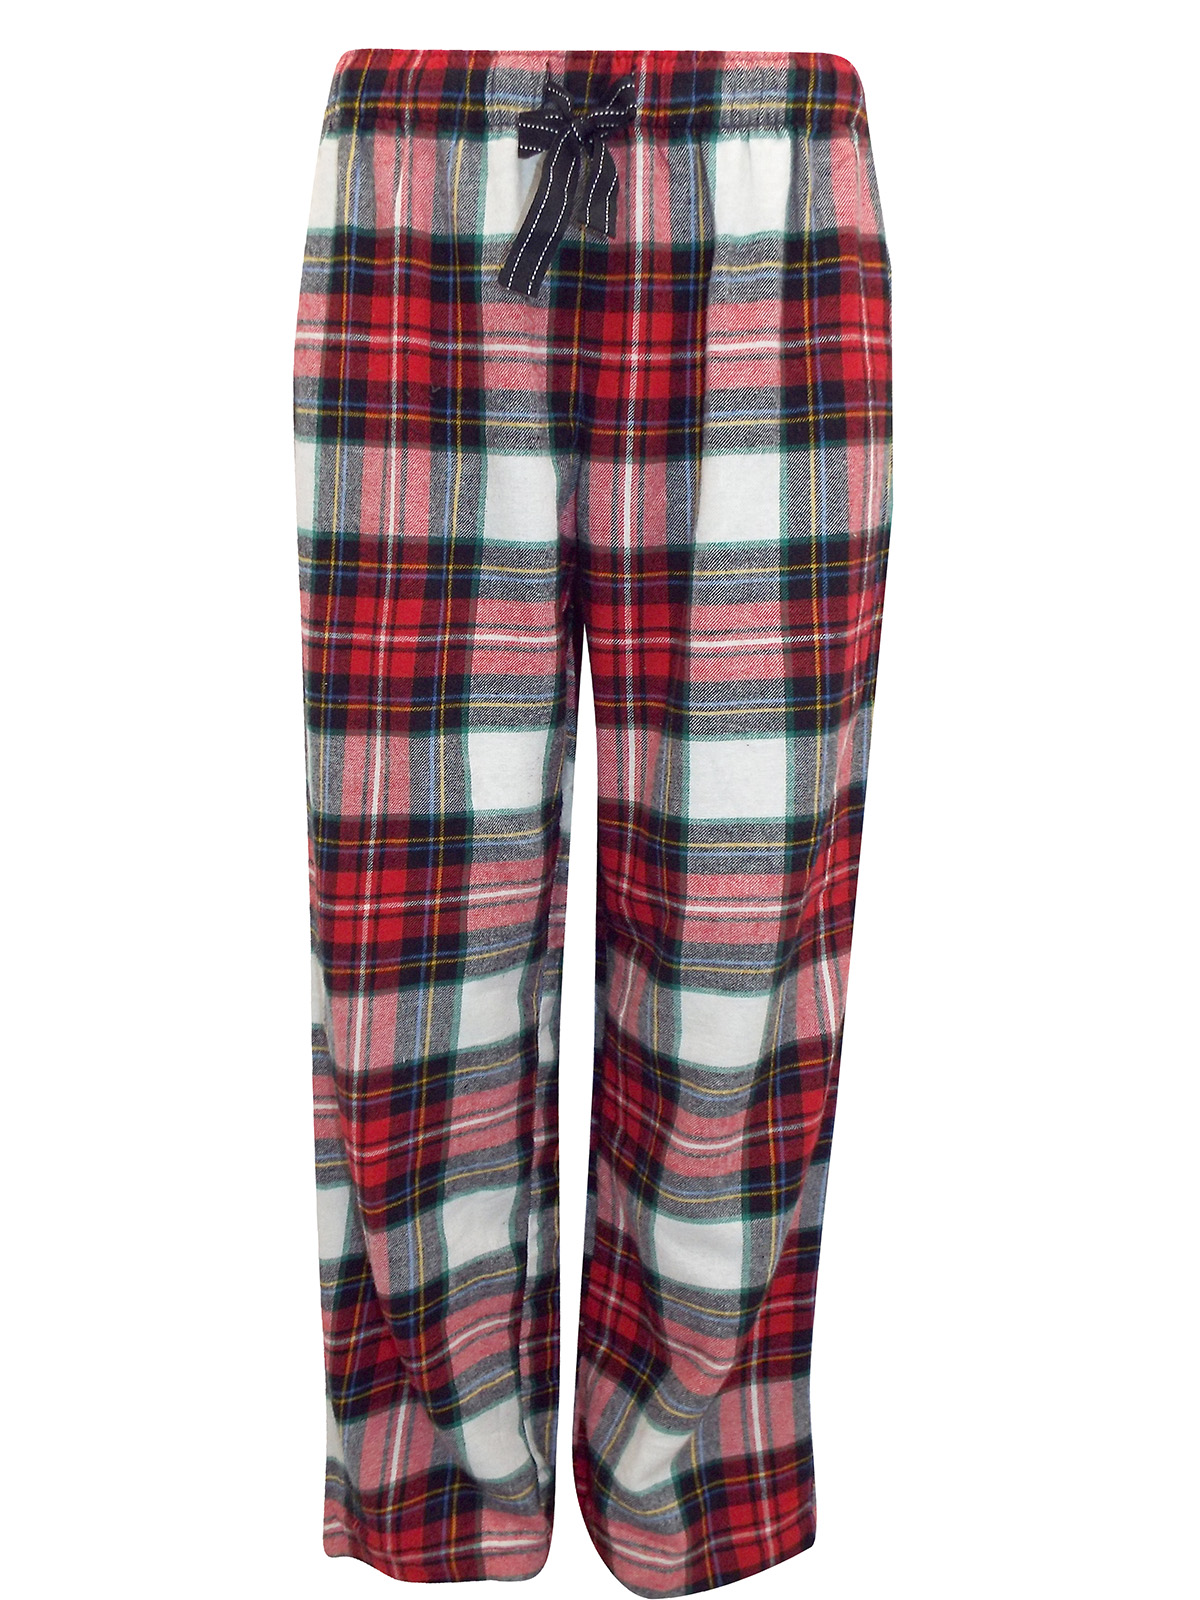 Relaxed Fit Pyjama bottoms - Black/White checked - Men | H&M IN